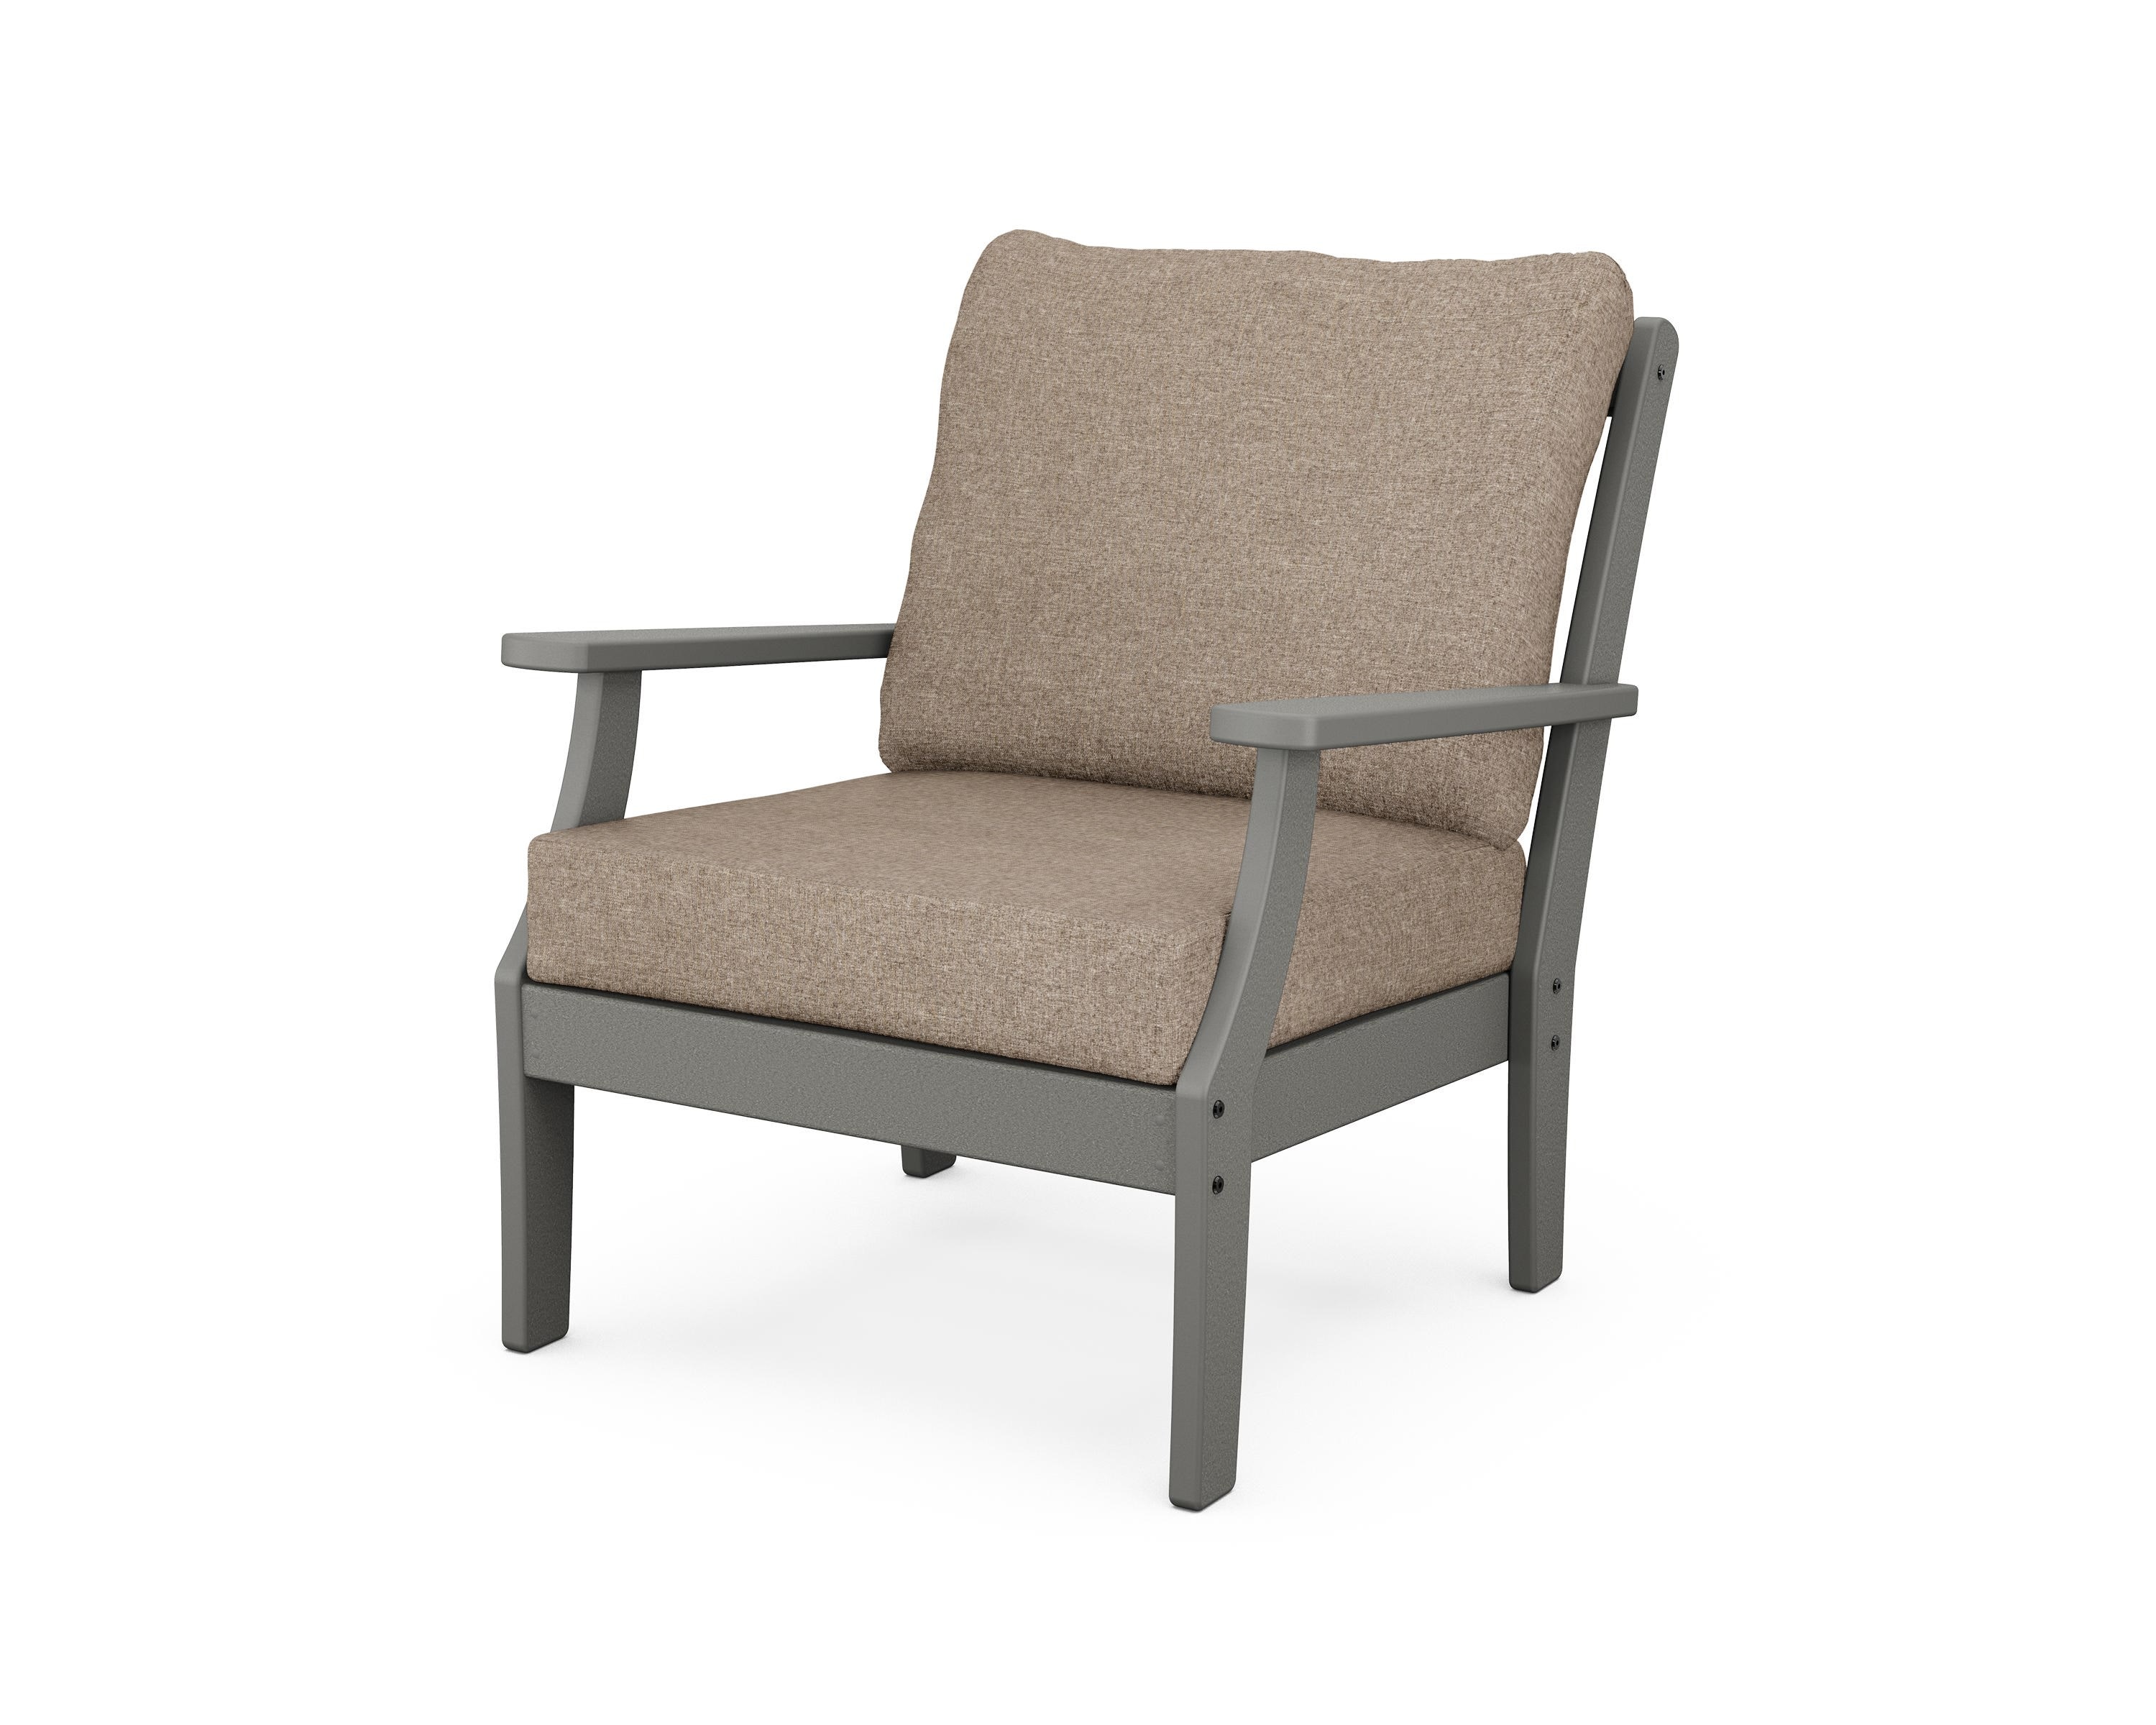 Trex Outdoor Furniture Yacht Club Deep Seating Chair